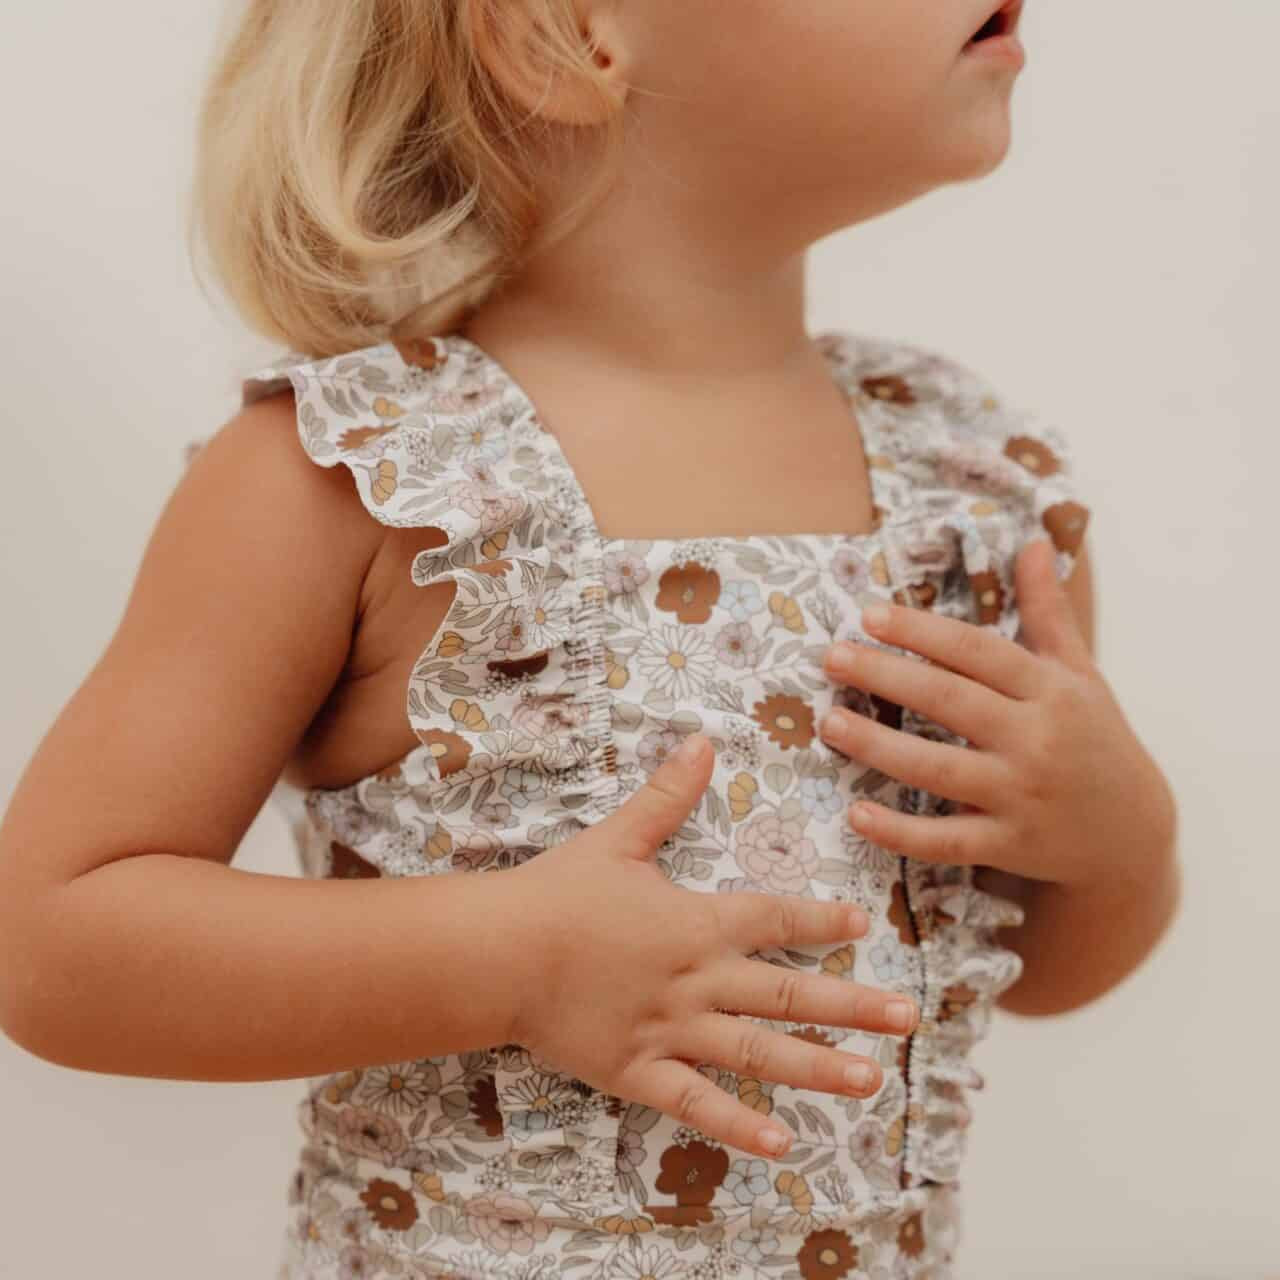 Toddler wearing a vintage floral ruffled swimsuit from Little Dutch.